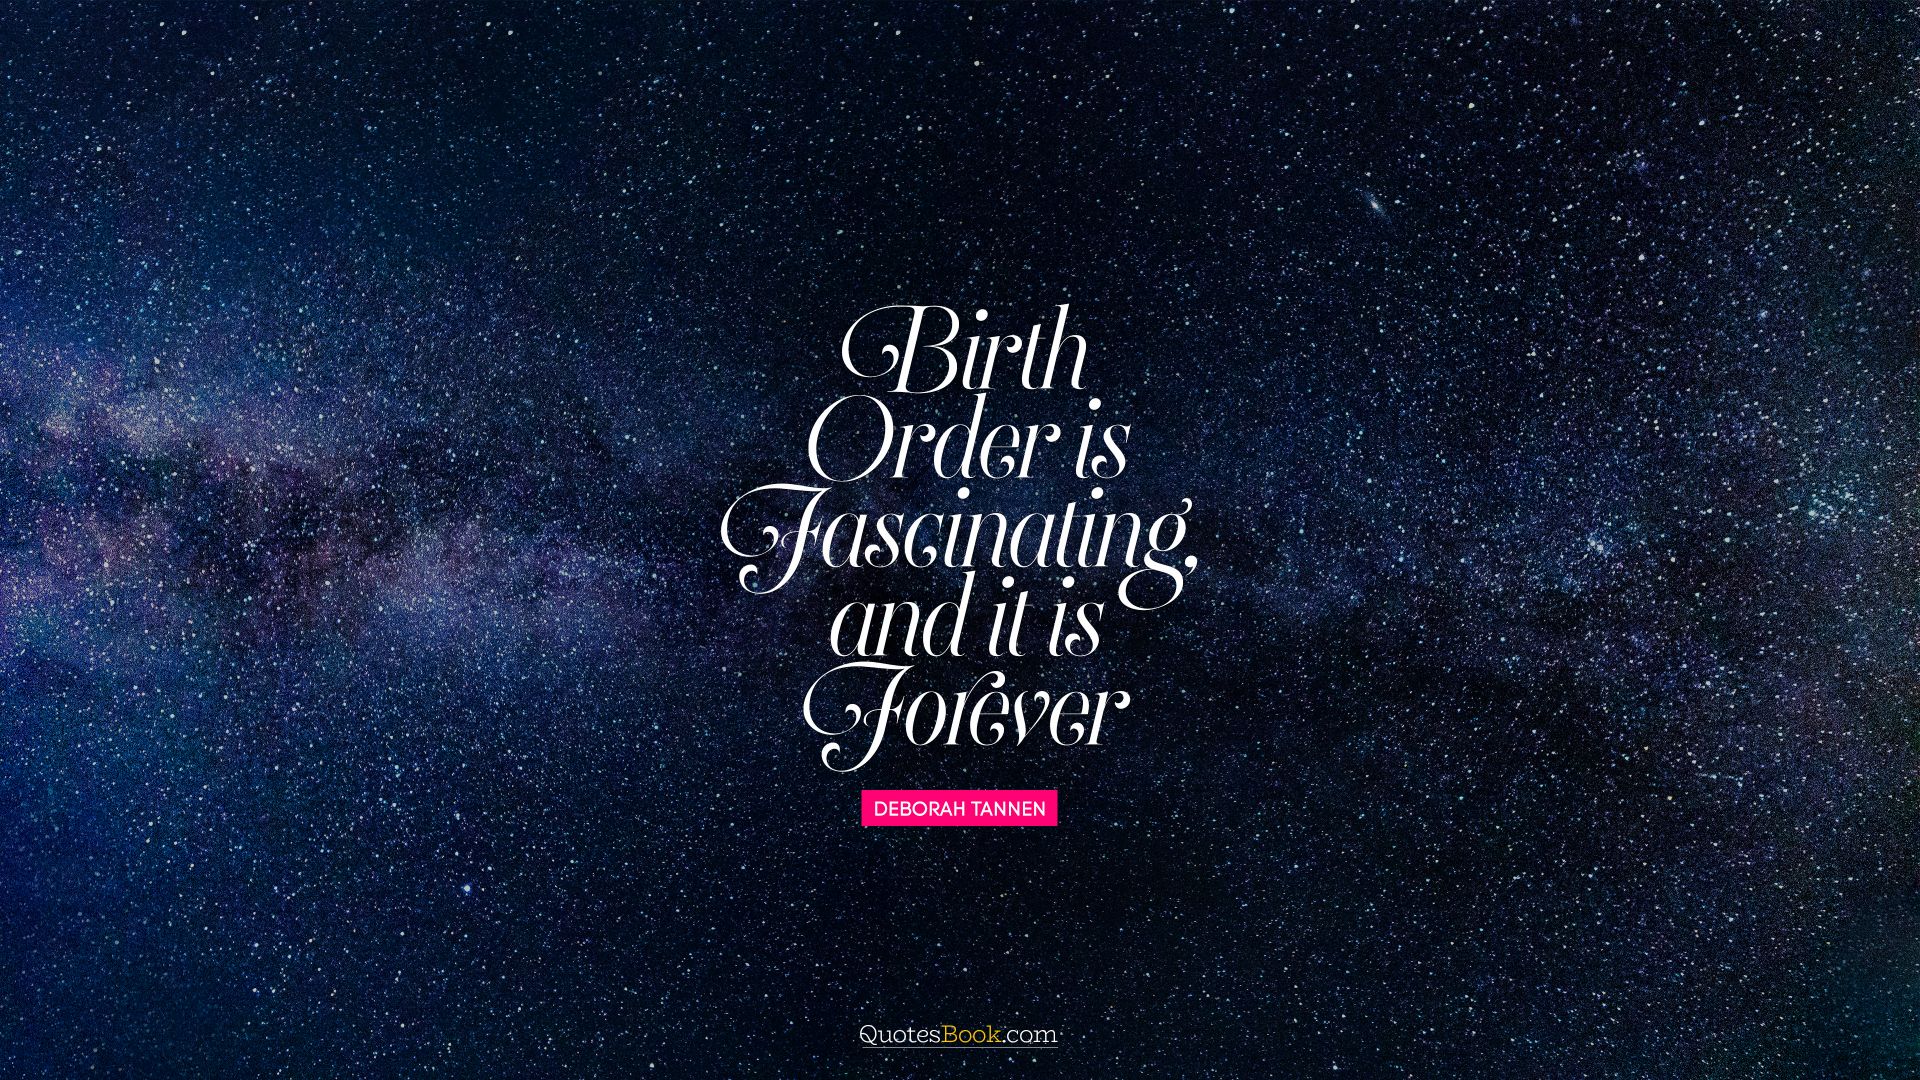 Birth order is fascinating, and it is forever. - Quote by Deborah Tannen